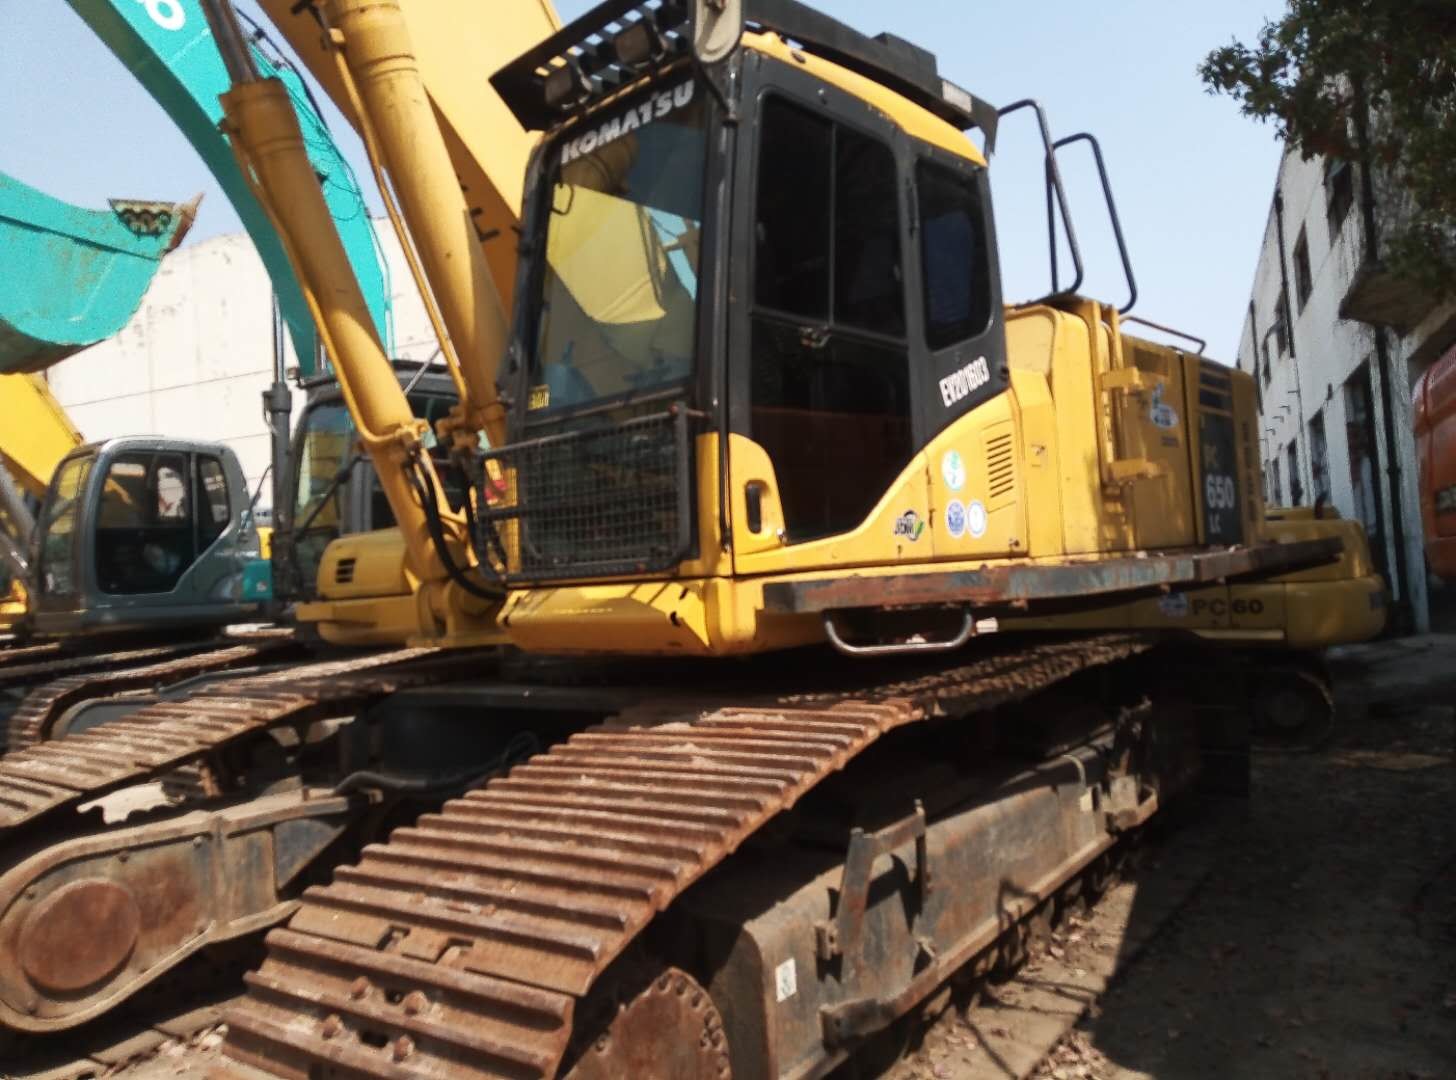 Quality Used KOMATSU PC650LC-8R 59 Ton Crawler Excavator in good condition and cheap price for sale